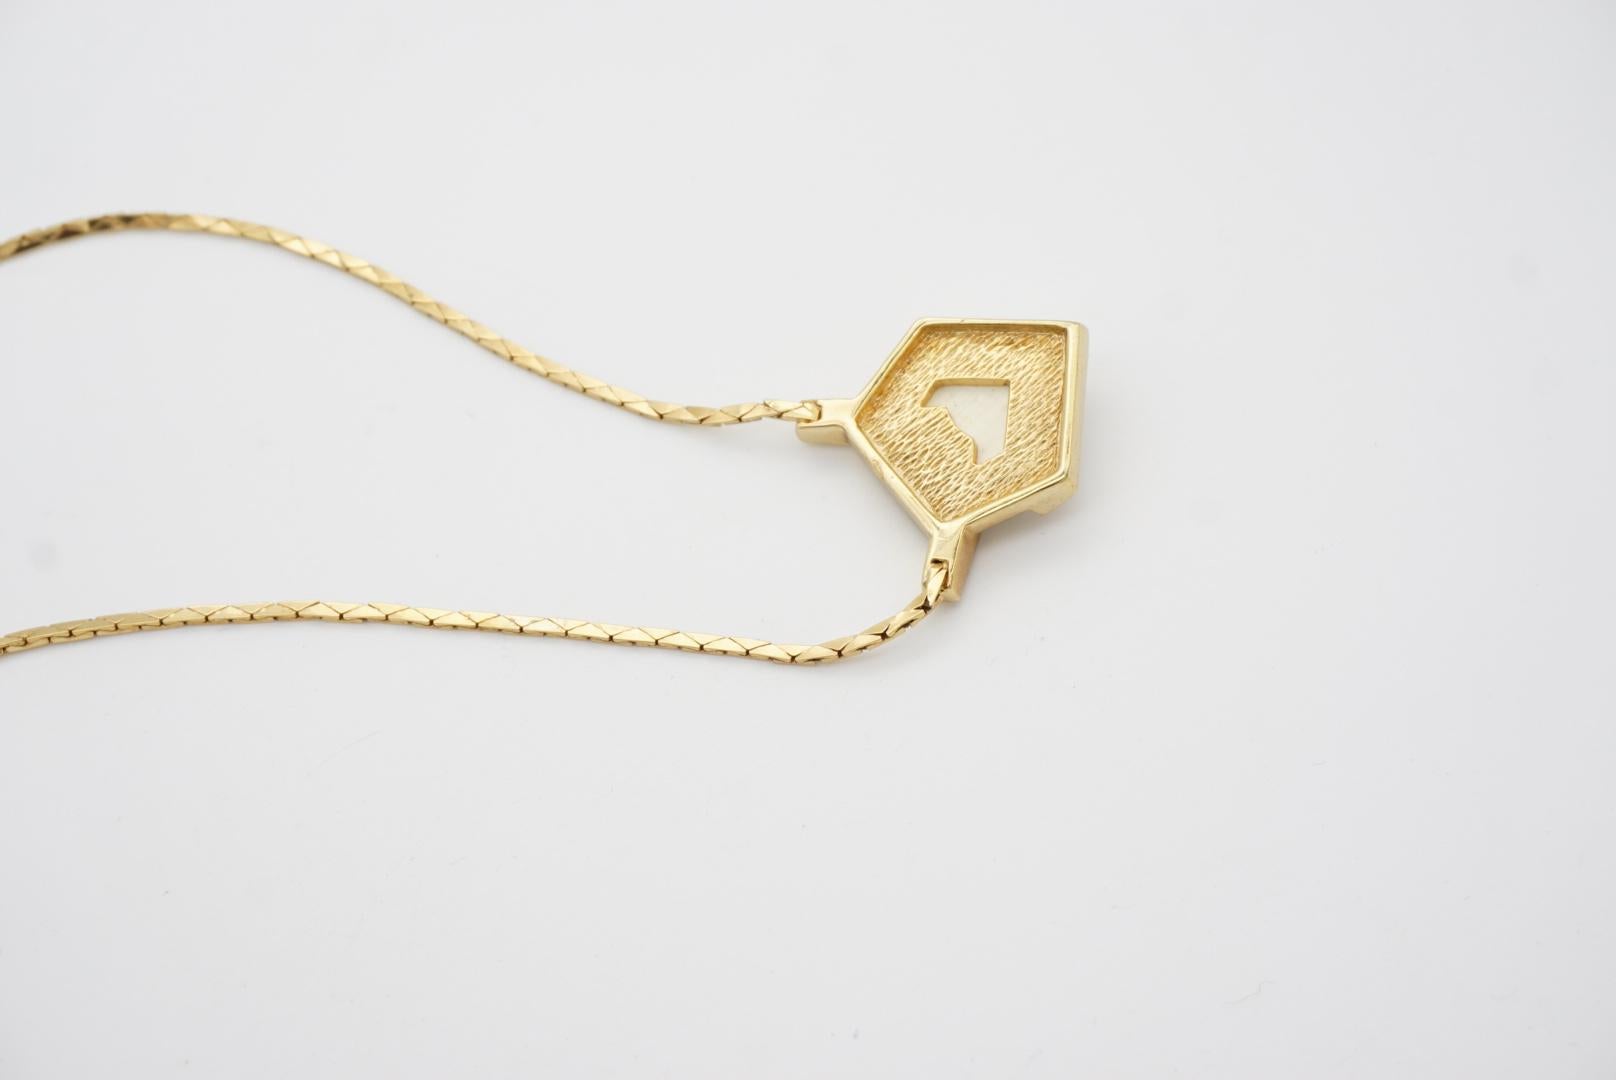 Christian Dior Vintage 1980s Triangle White Cream Crystal Gold Pendant Necklace For Sale 4